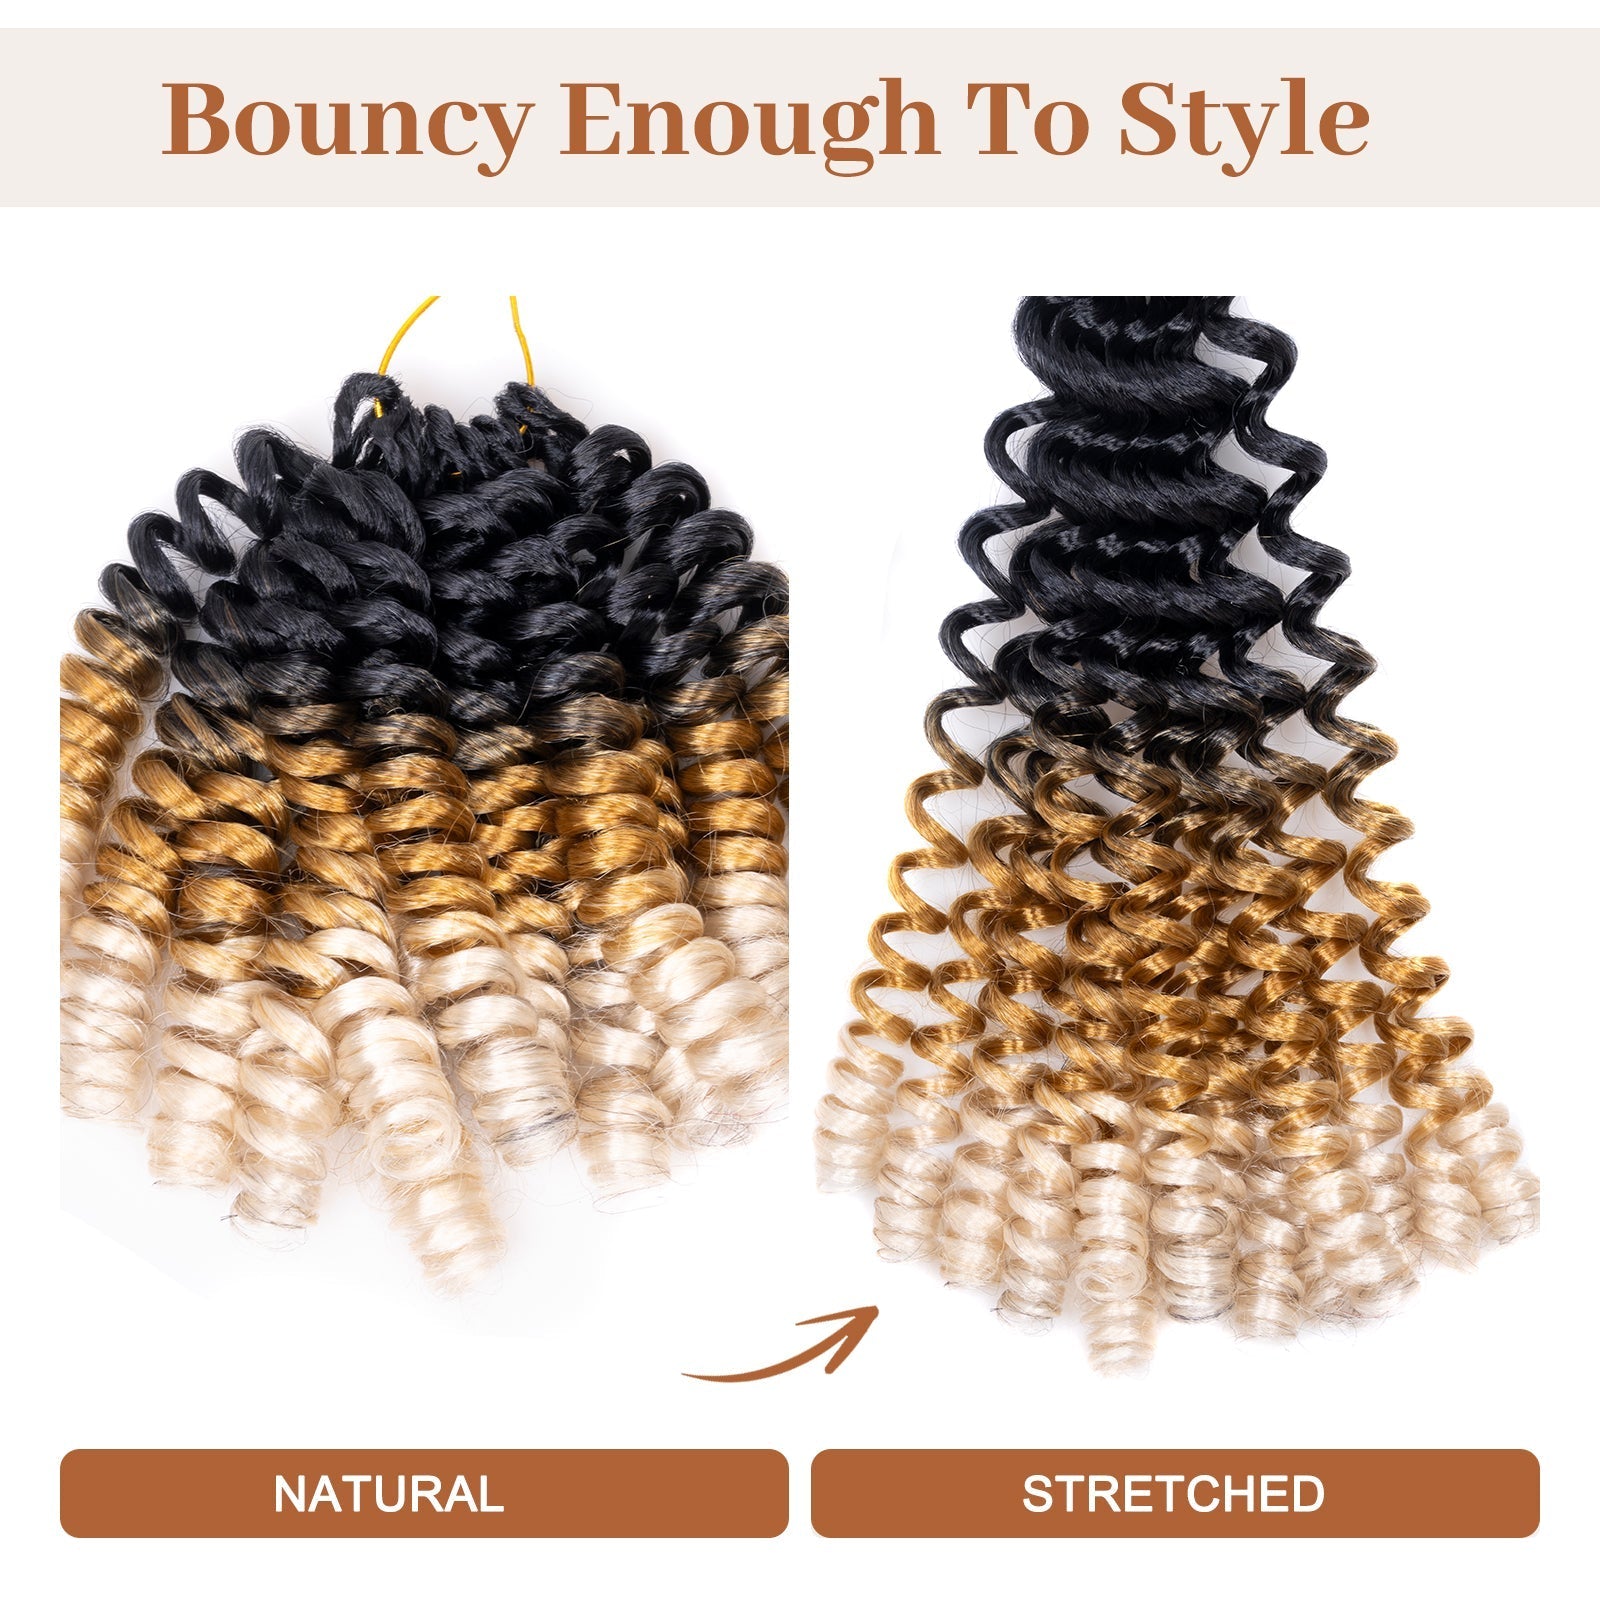 Wand Curl Synthetic Braiding Hair Exentions - Toyotress